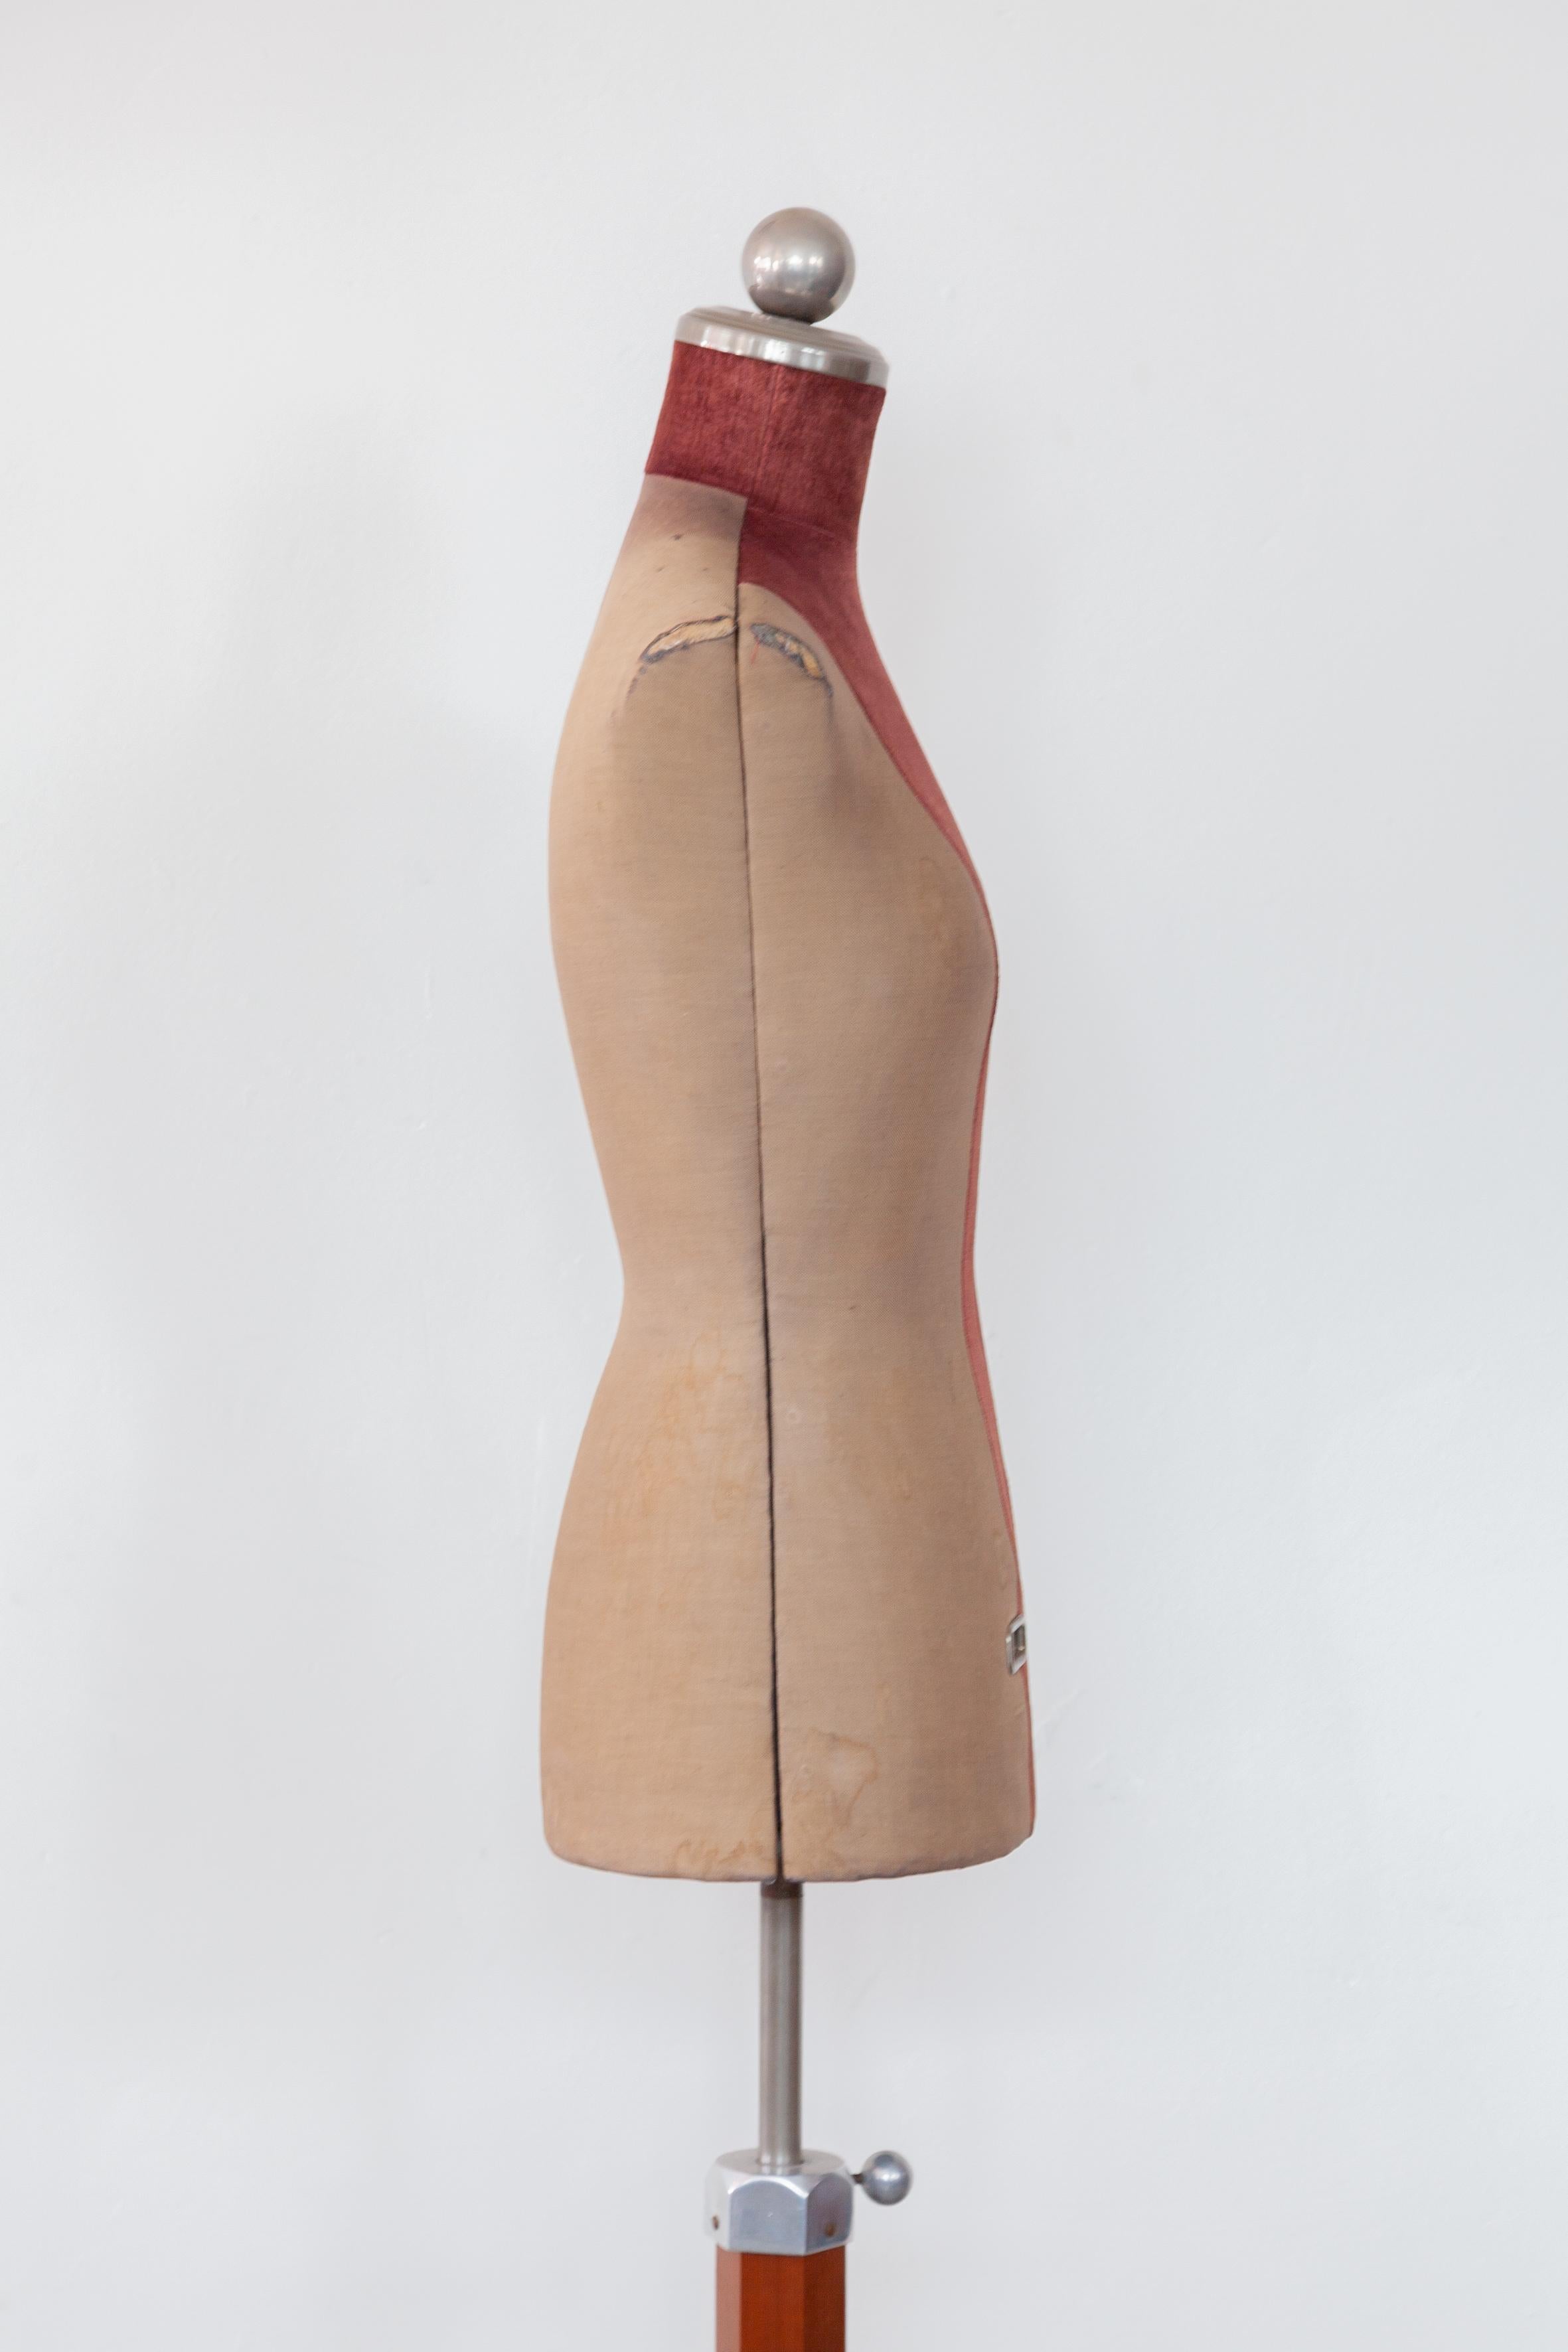 Early 20th Century Art Deco Dress-form Adjustable Tailors Dummy Mannequin, 1930s France